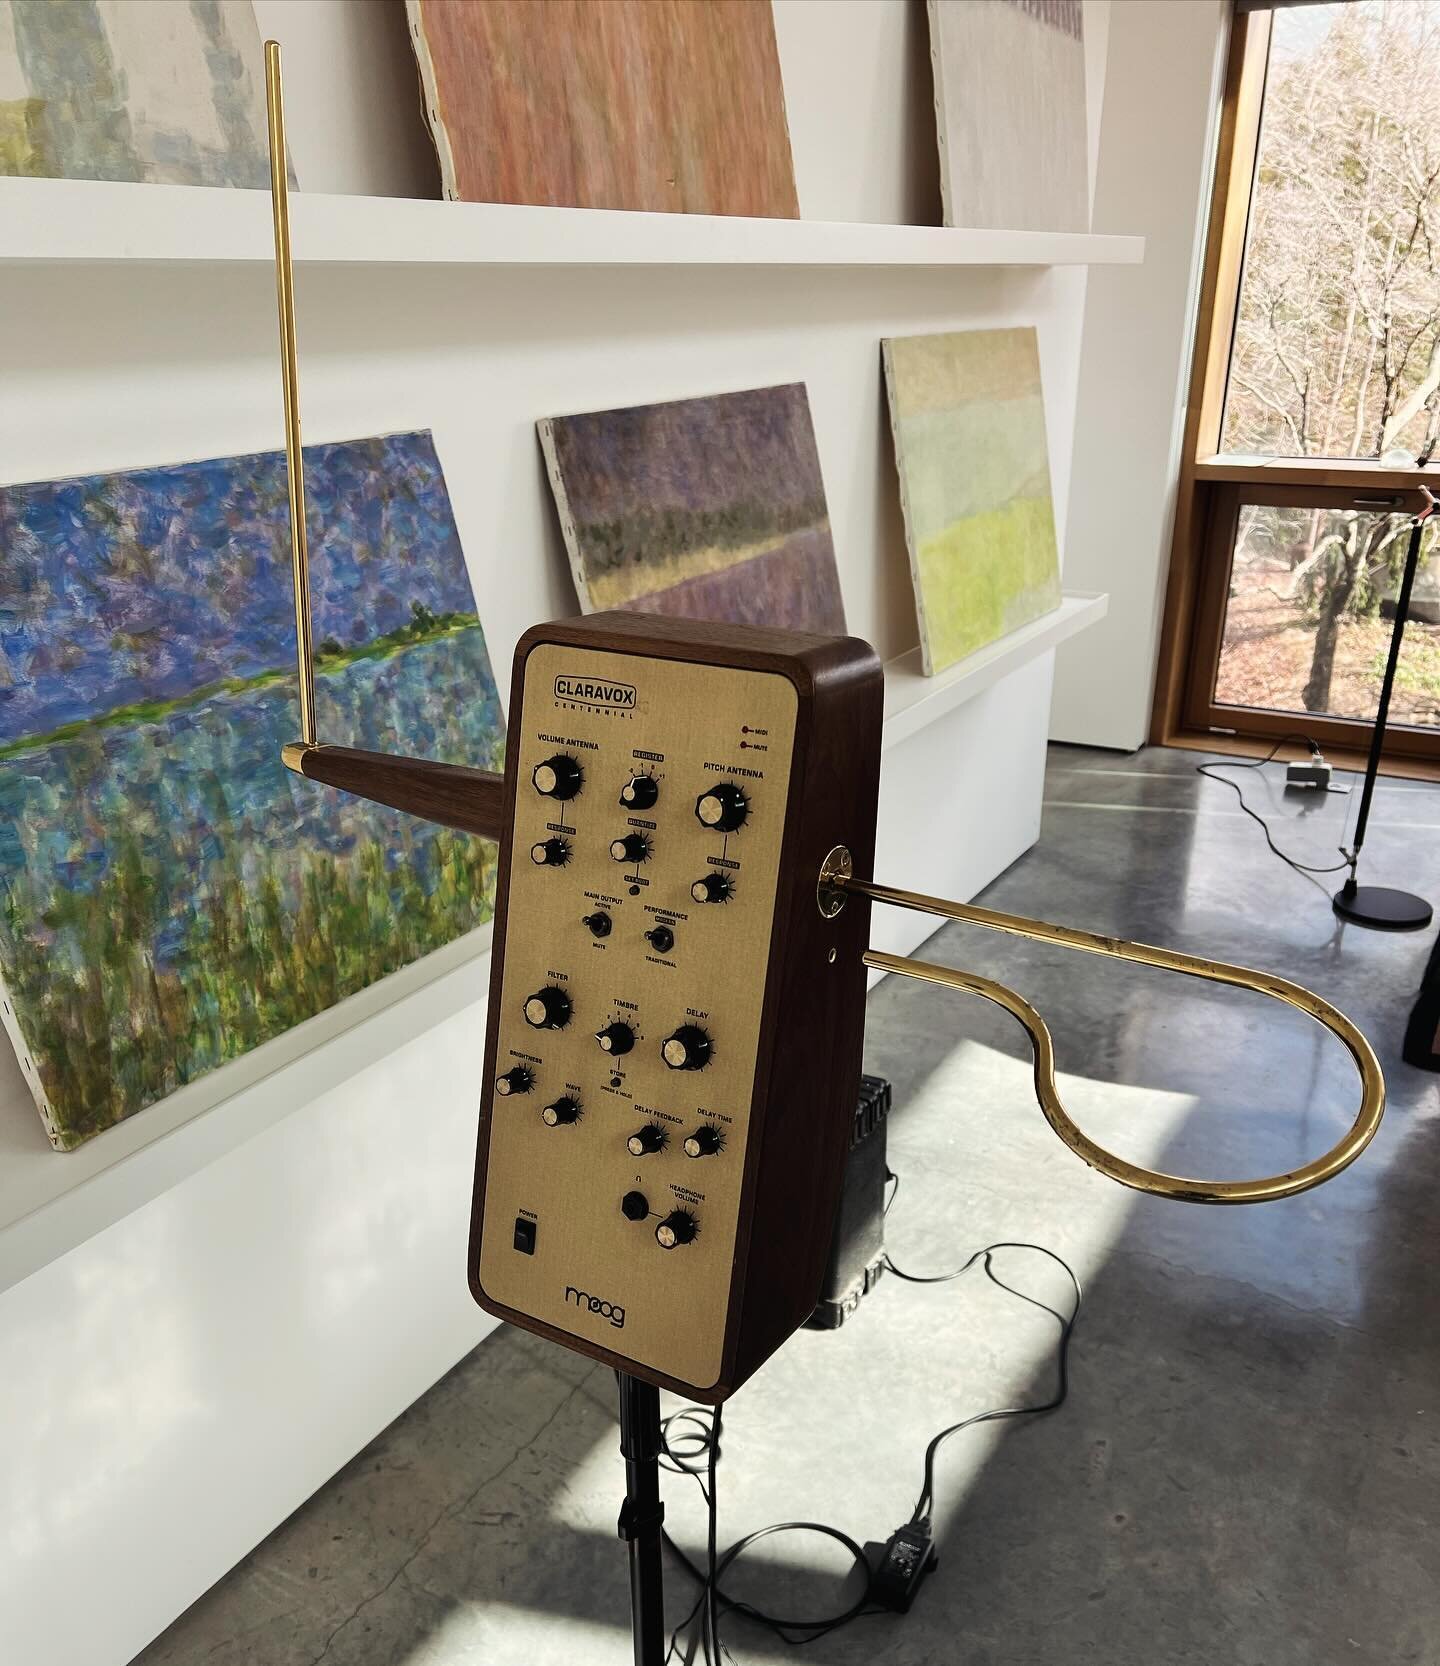 There are mighty winds blowing outside of Lost and Found Lab, while the interior remains perfectly still&hellip; and a theremin stands waiting for the return of @doritchrysler  @caramoor  #theremin #artistresidency  #lucierosen